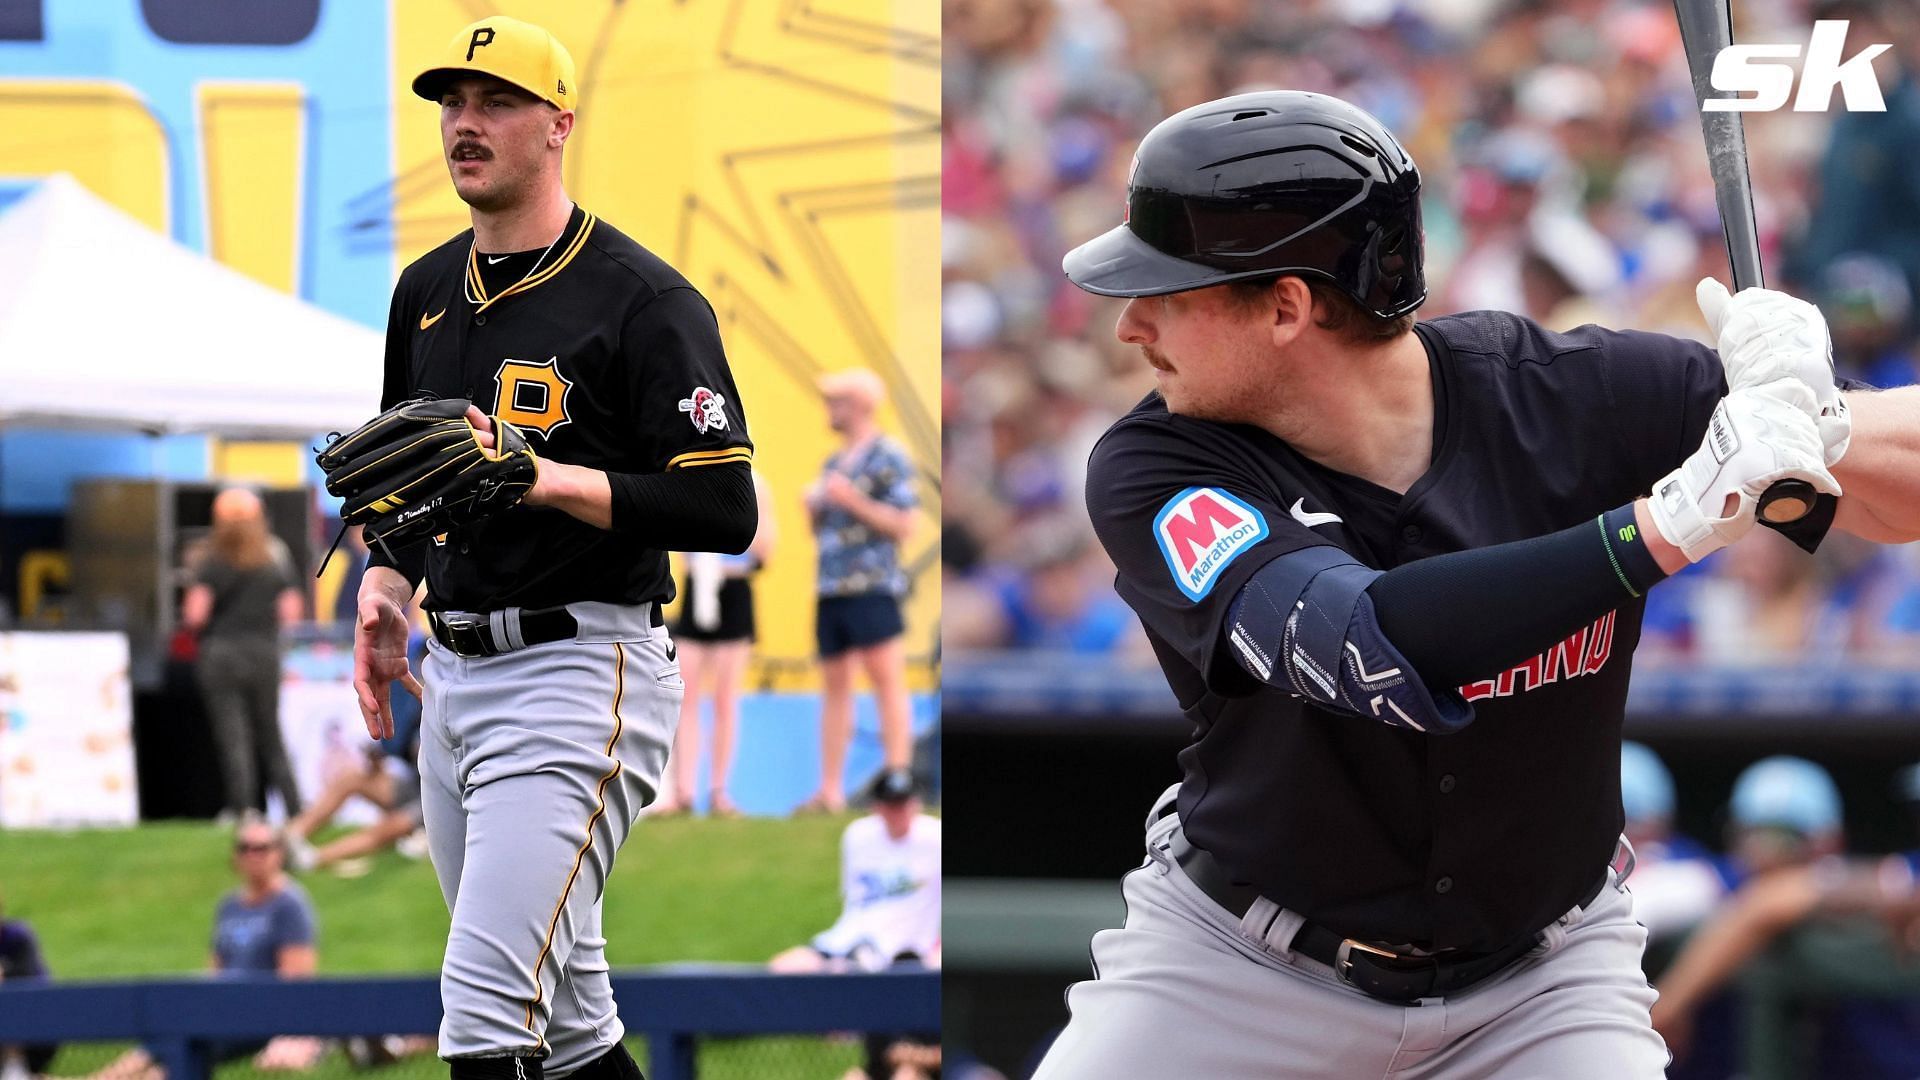 Paul Skenes and Kyle Manzardo are two must-stash prospects in fantasy baseball leagues